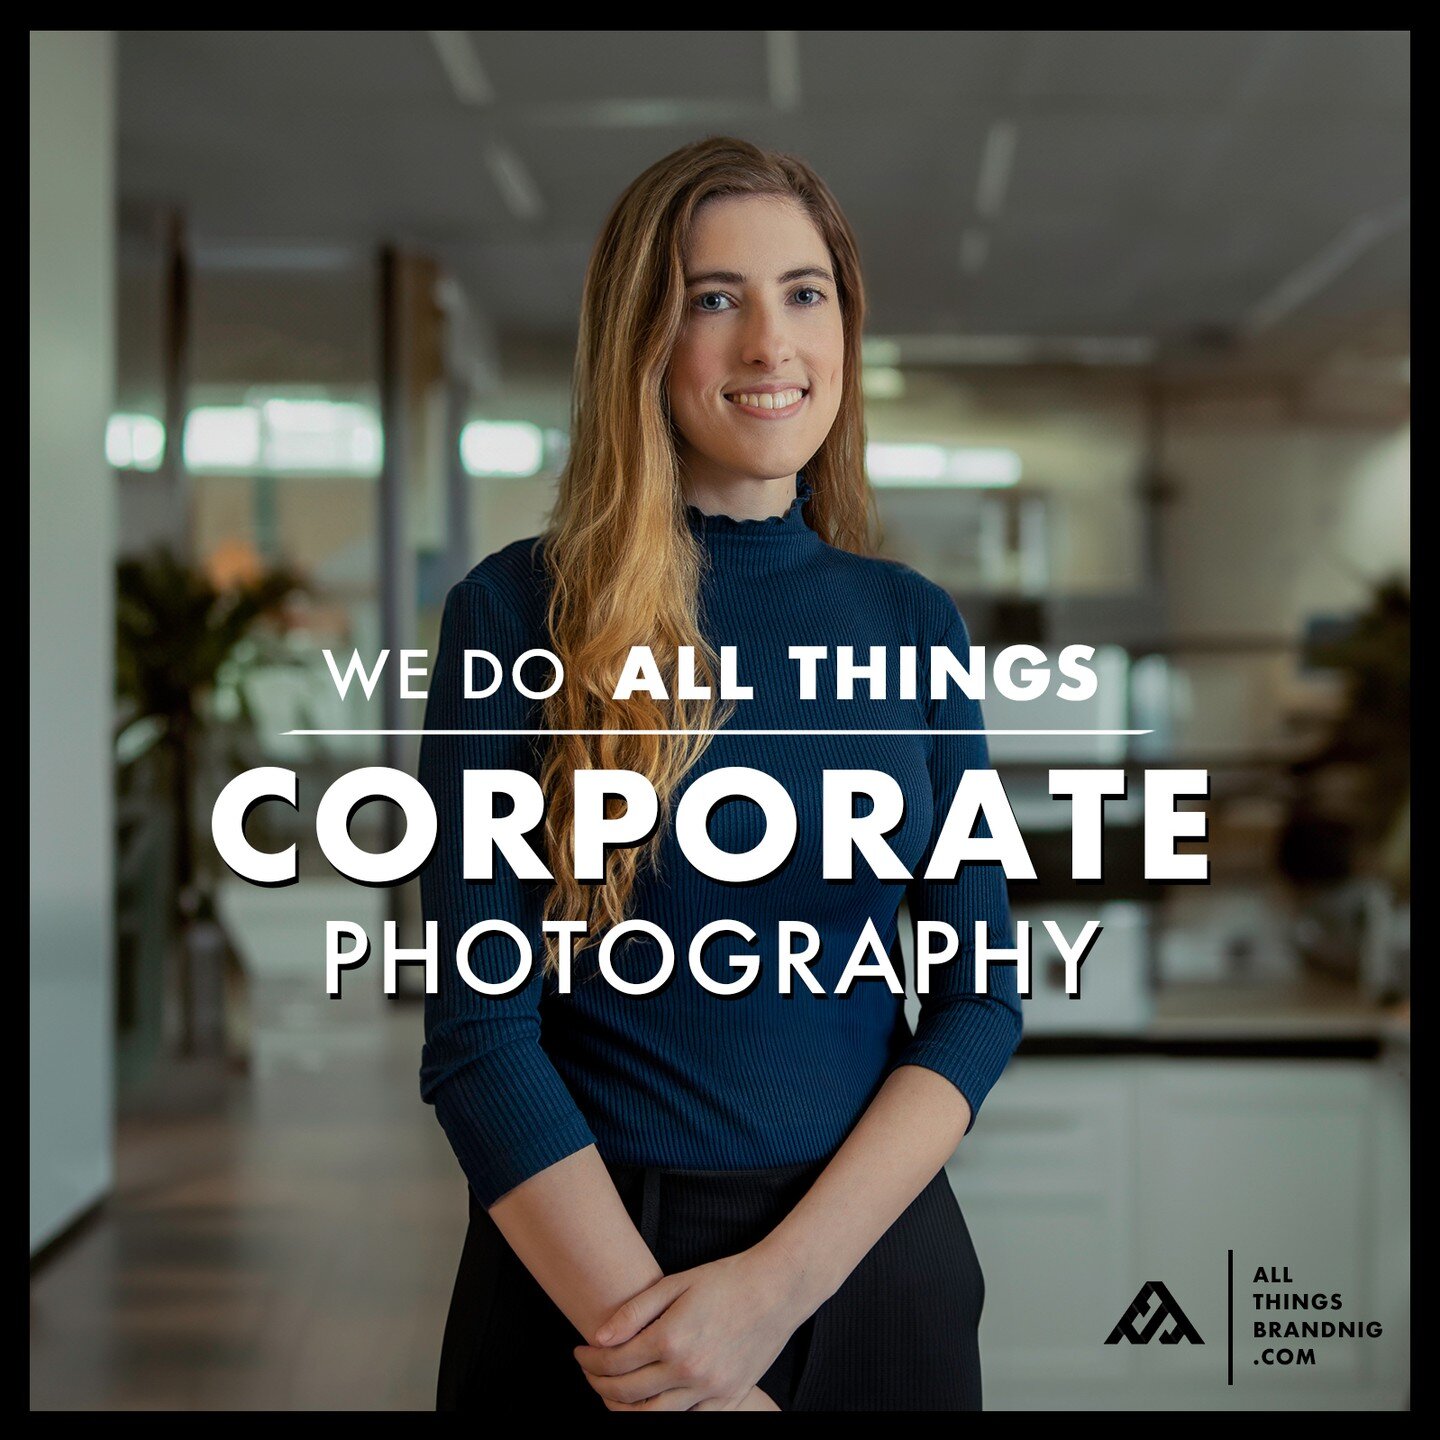 Need portraits for your business? We can help with that. 

www.allthingsbranding.com